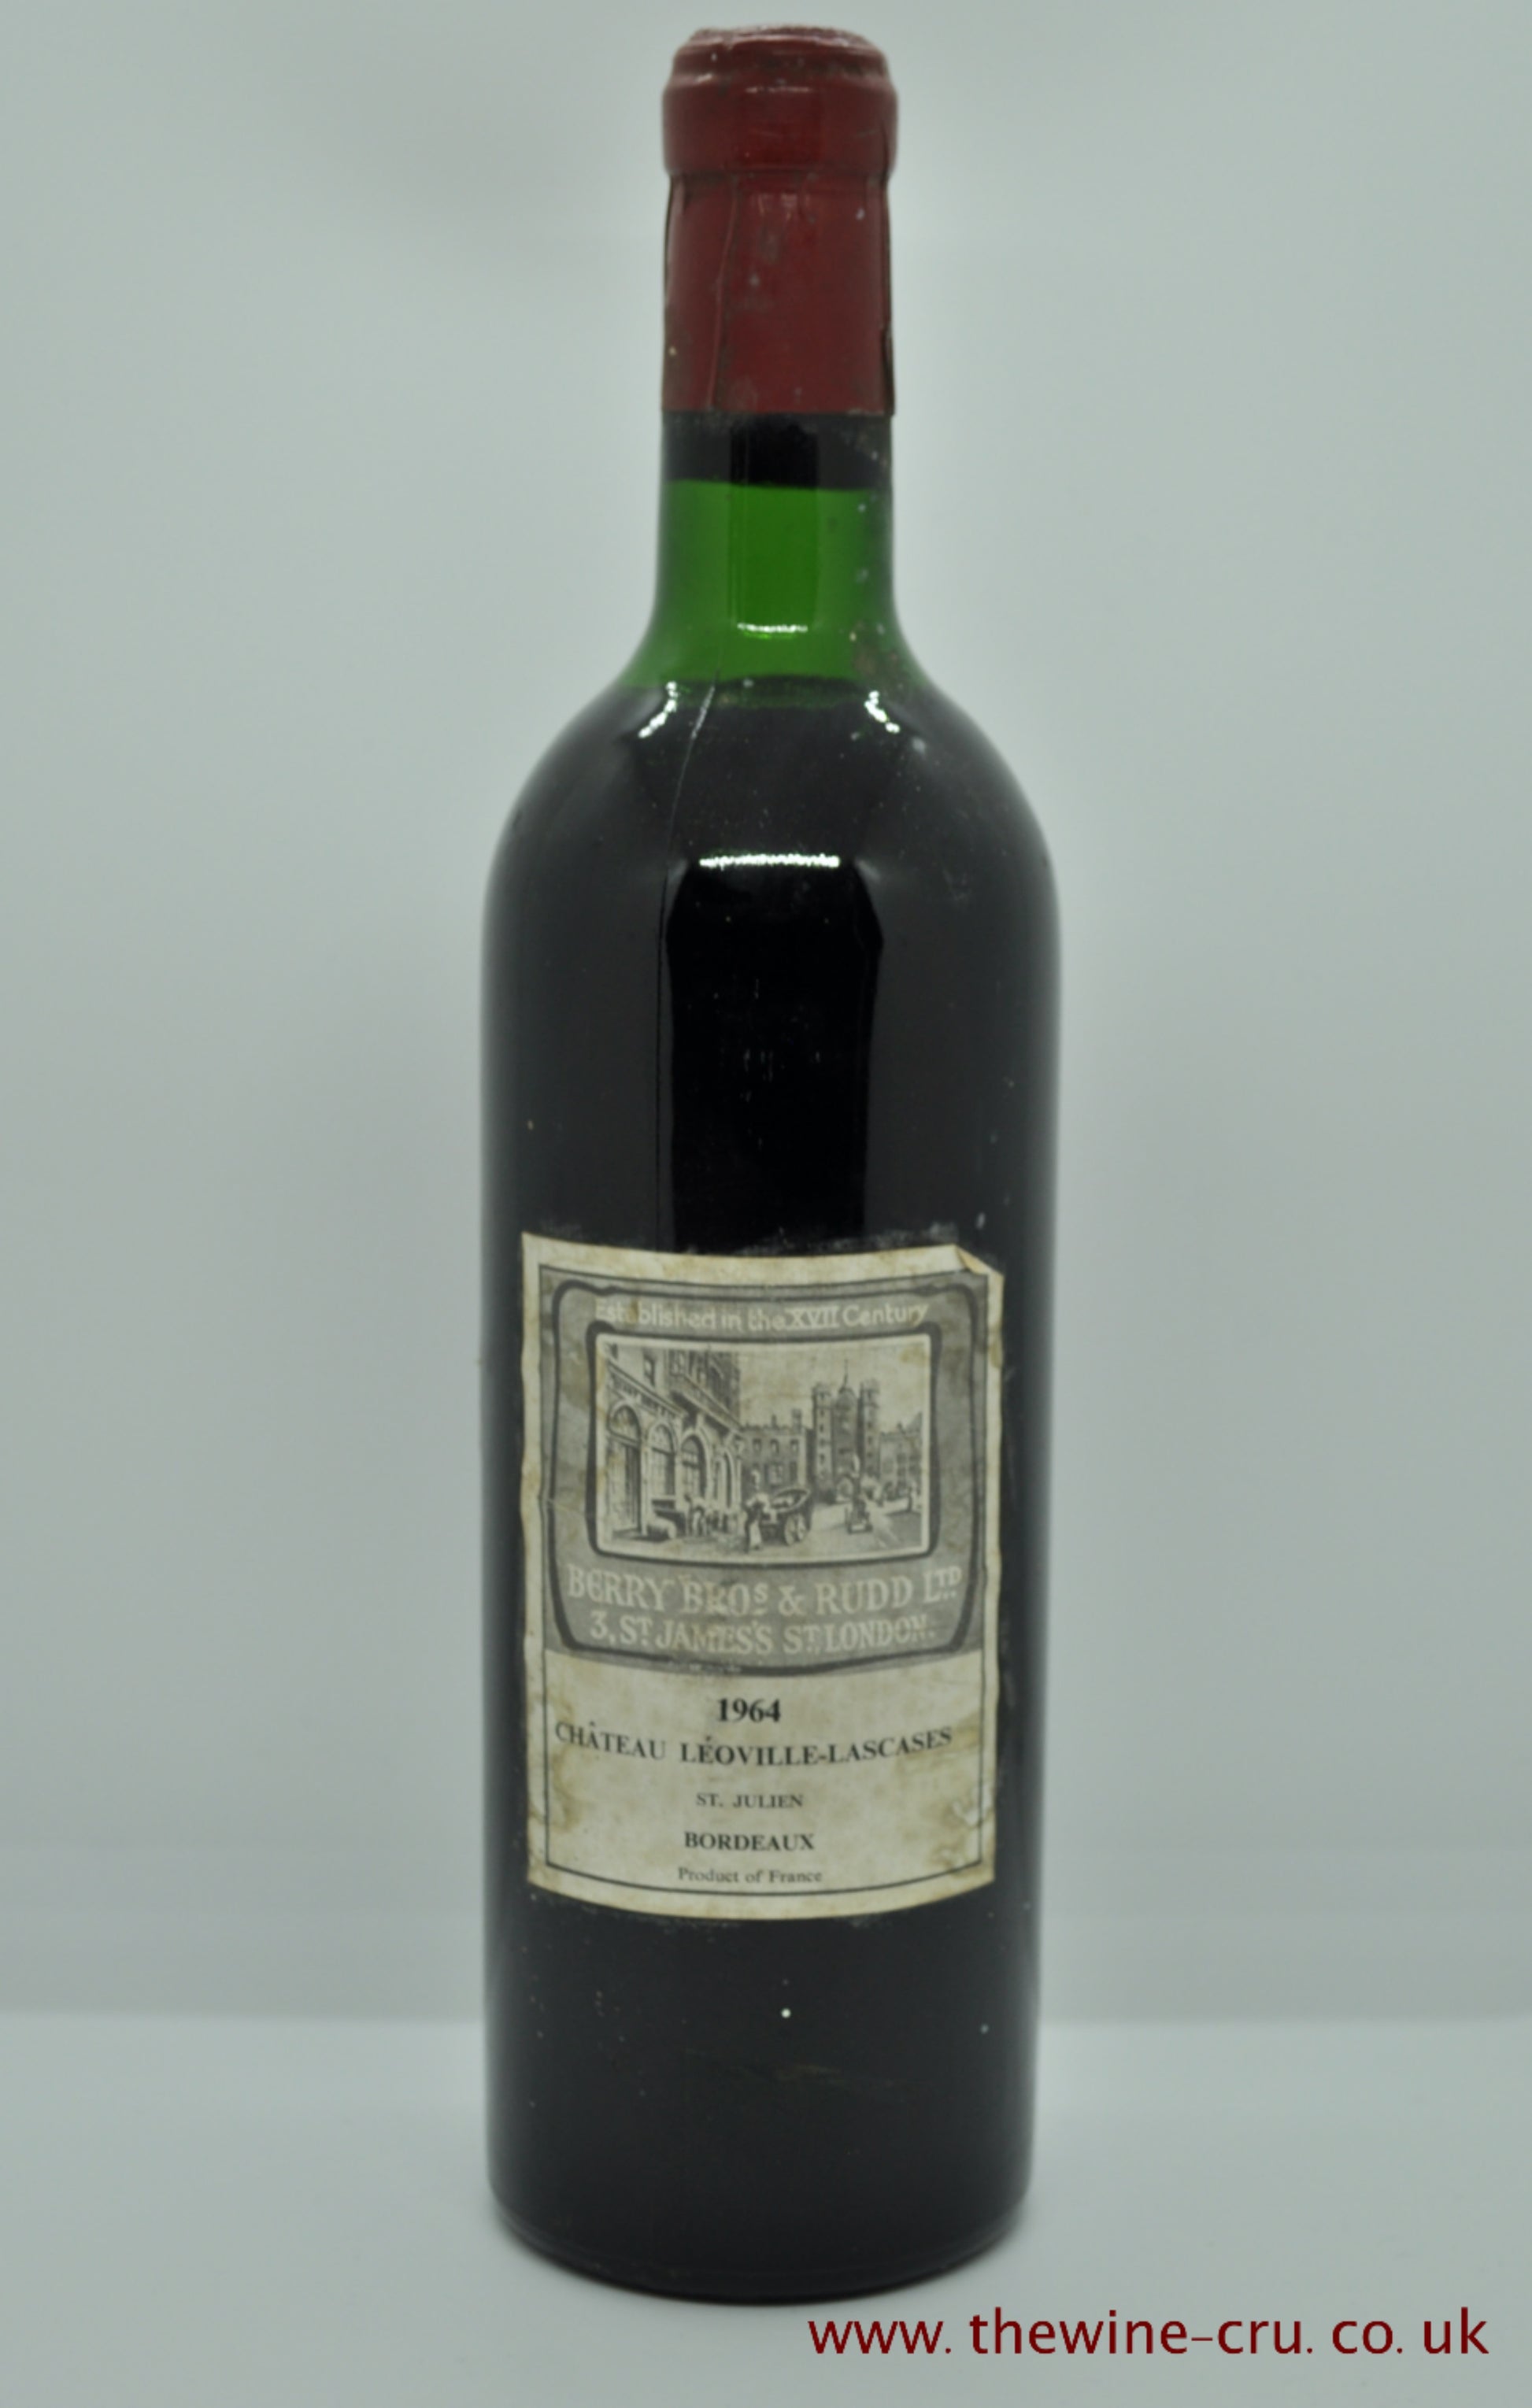 1964 vintage red wine. Chateau Leoville Las Cases 1964. France, Bordeaux. Immediate delivery UK. Free local delivery.